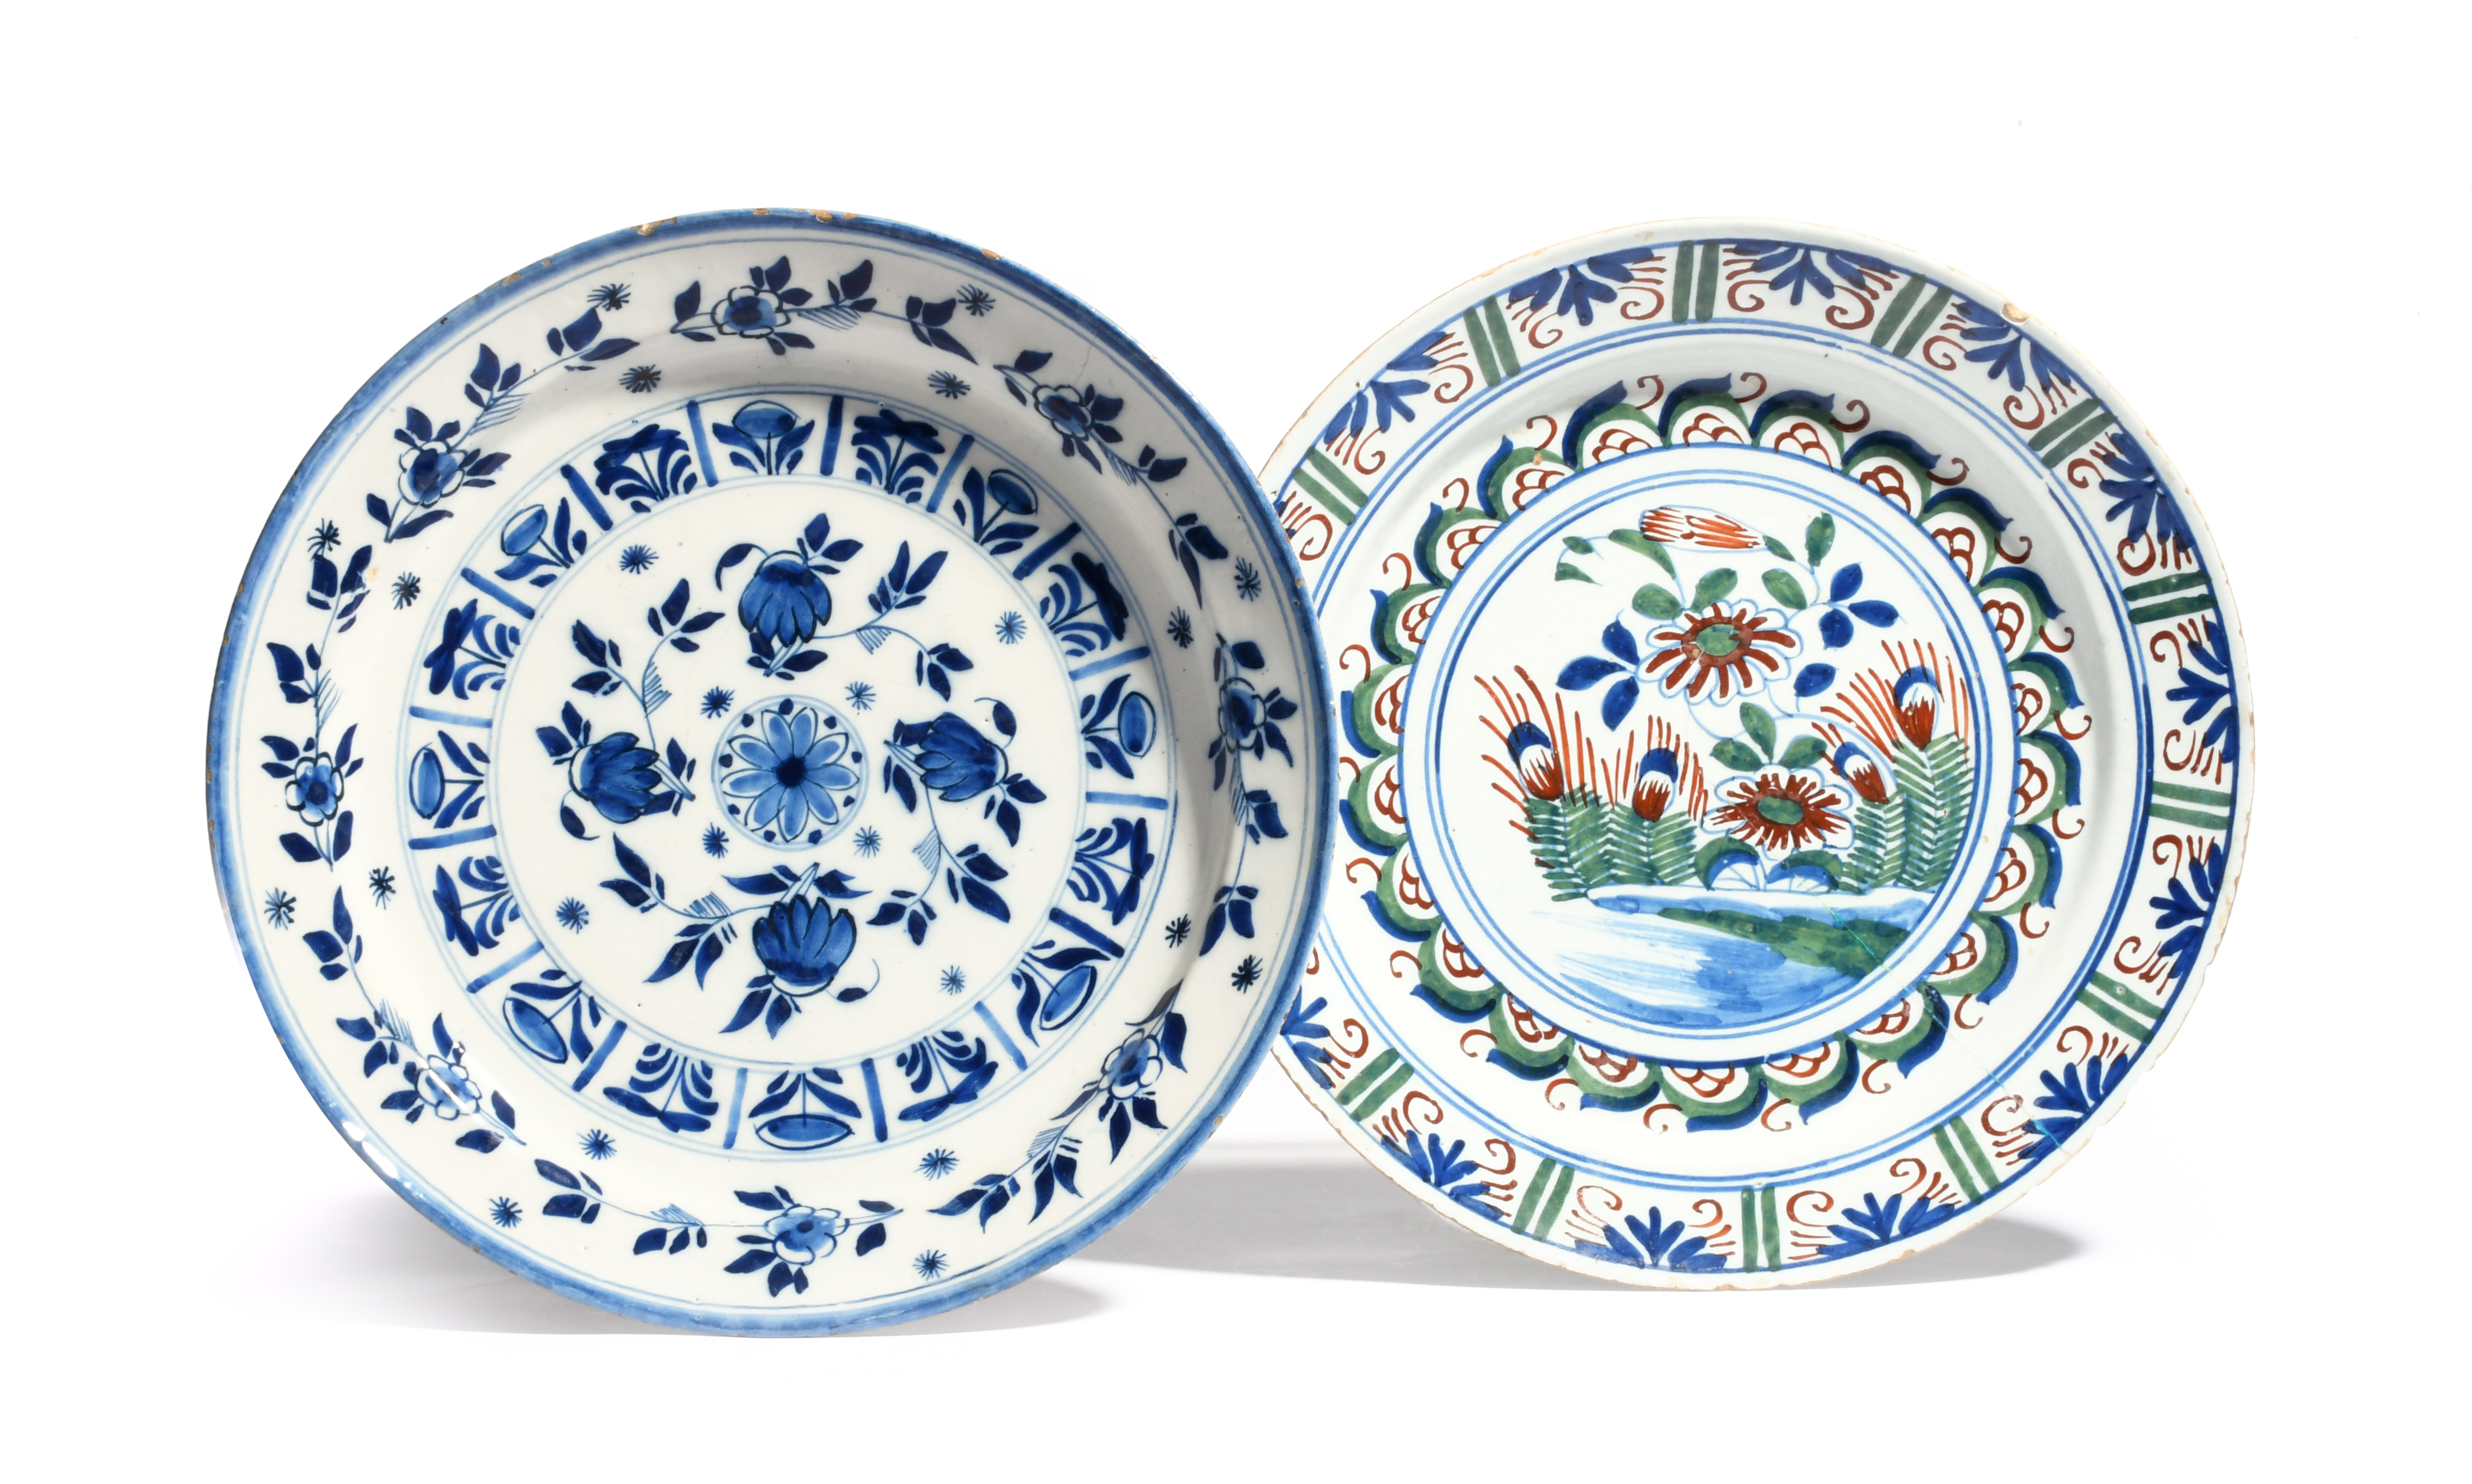 Two Bristol delftware chargers c.1735, one painted in red, green and blue with flowering branches